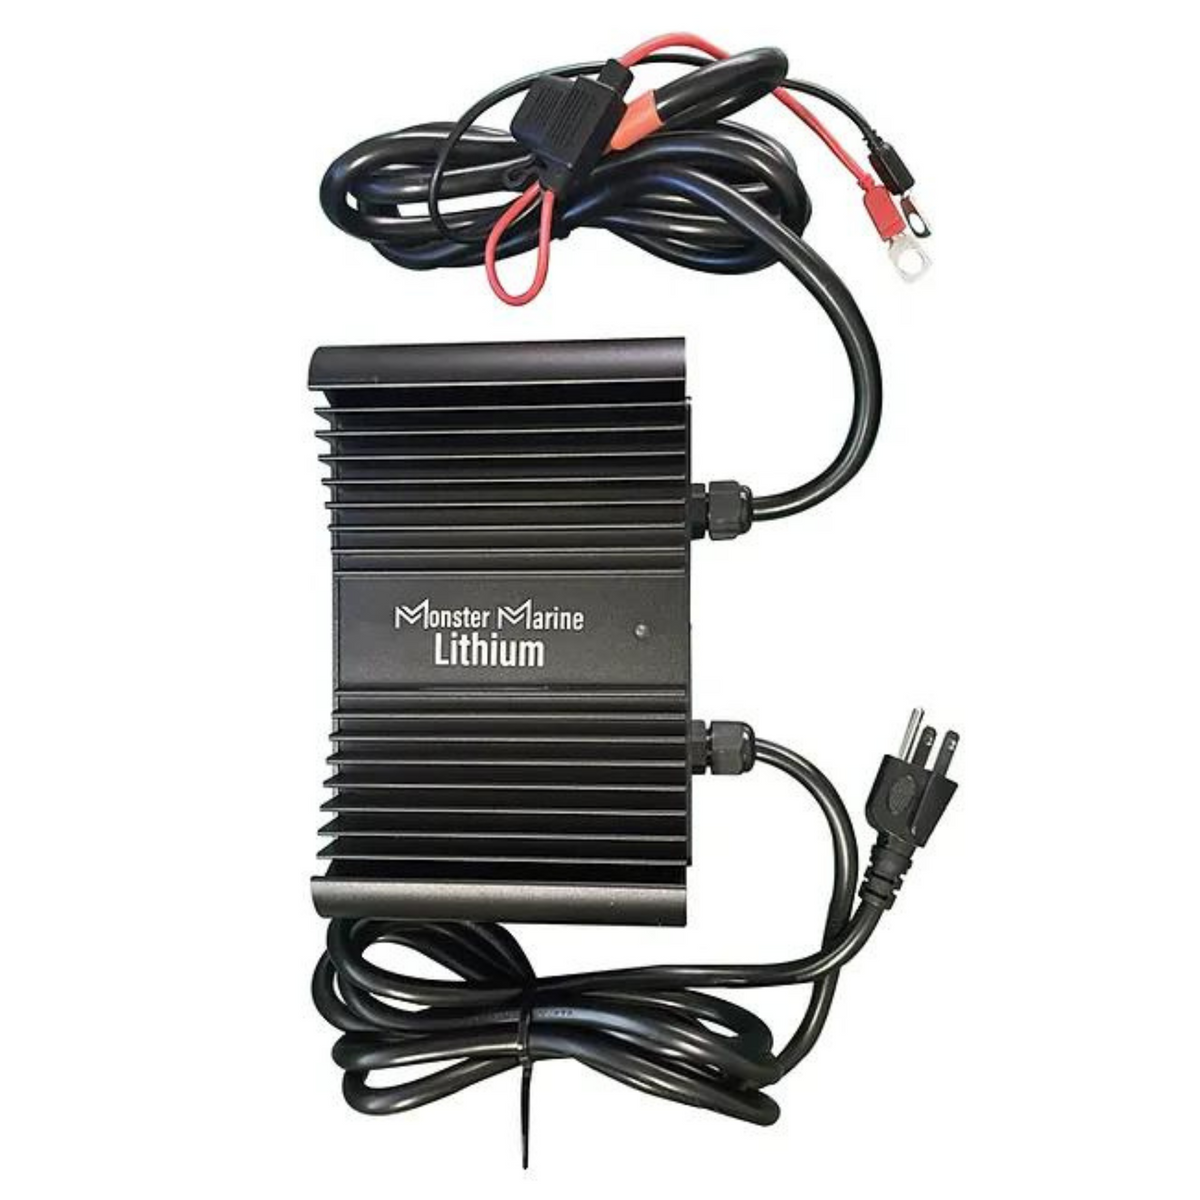 Monster Marine Lithium 36V 10A Waterproof Lithium Battery Charger